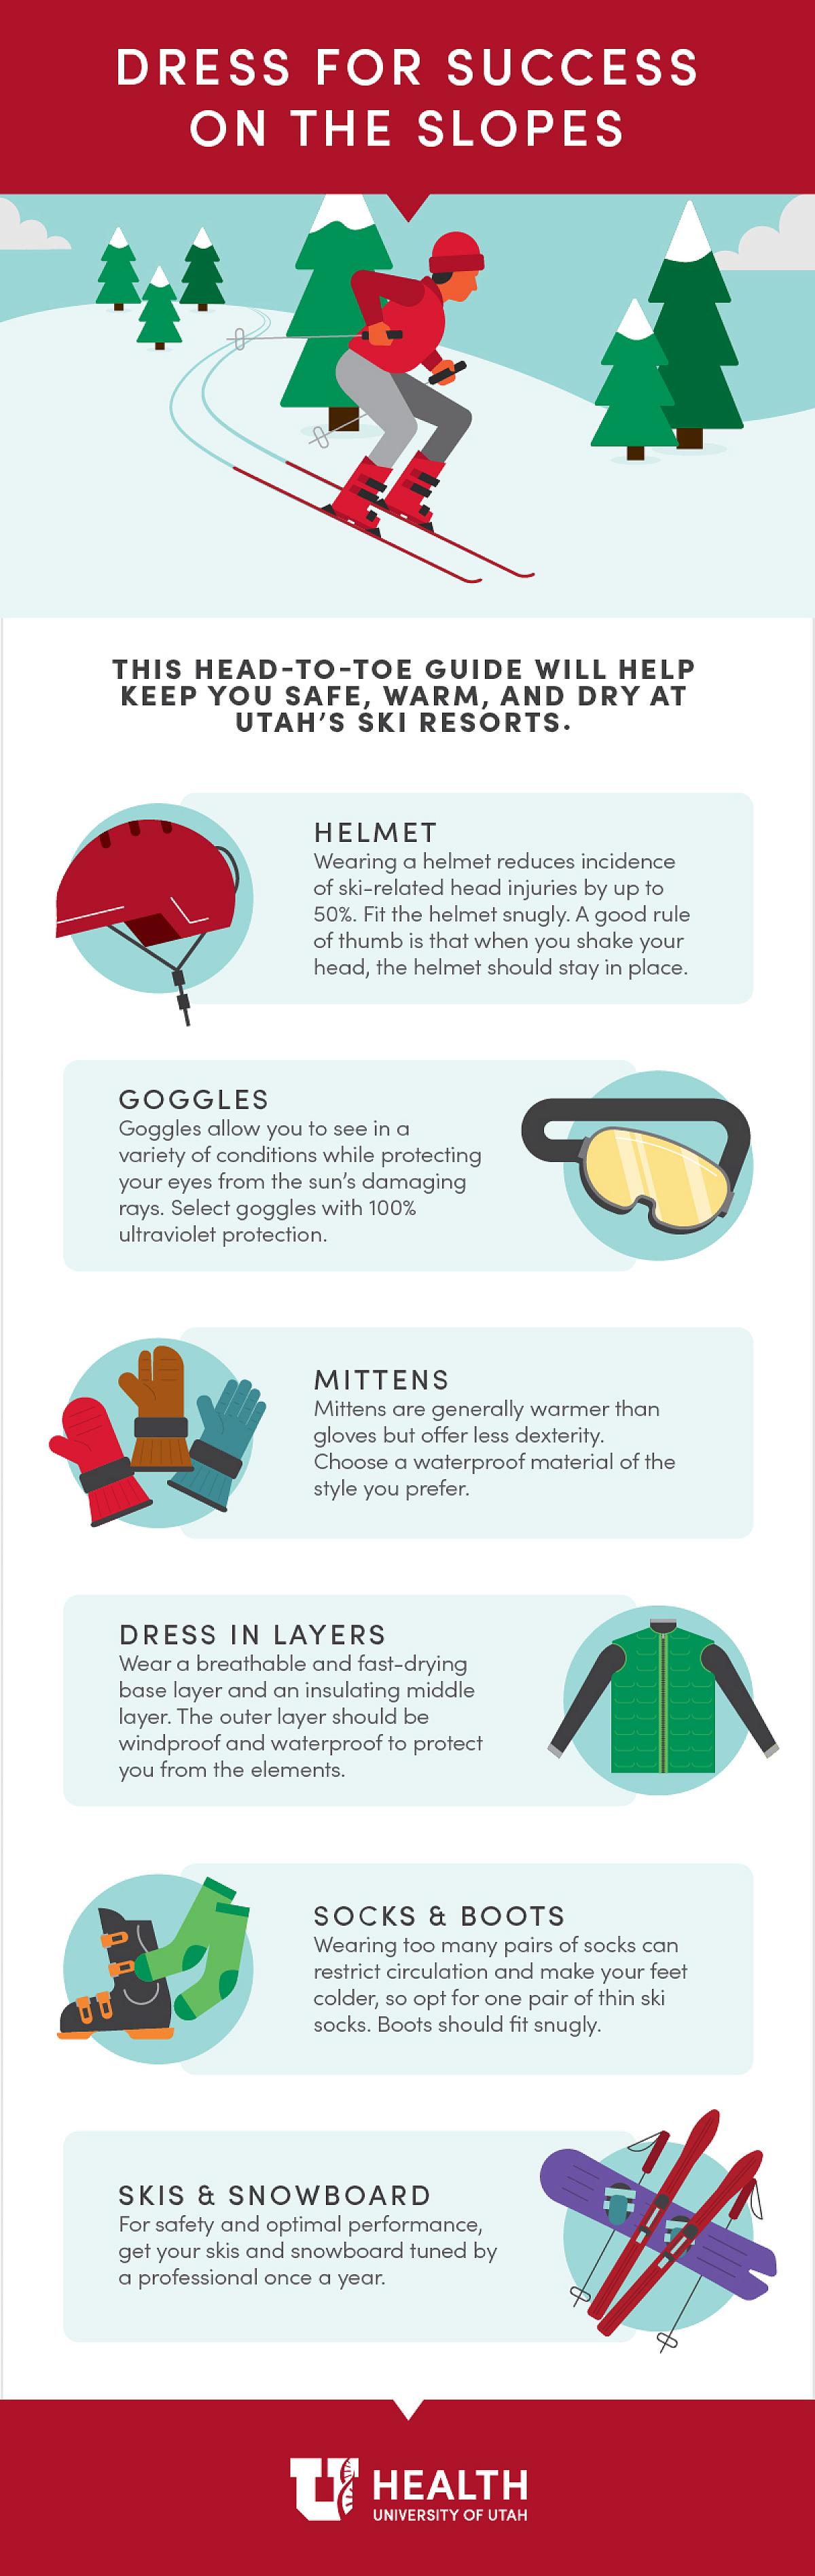 Winter Sports, Dress for the Slopes Infographic